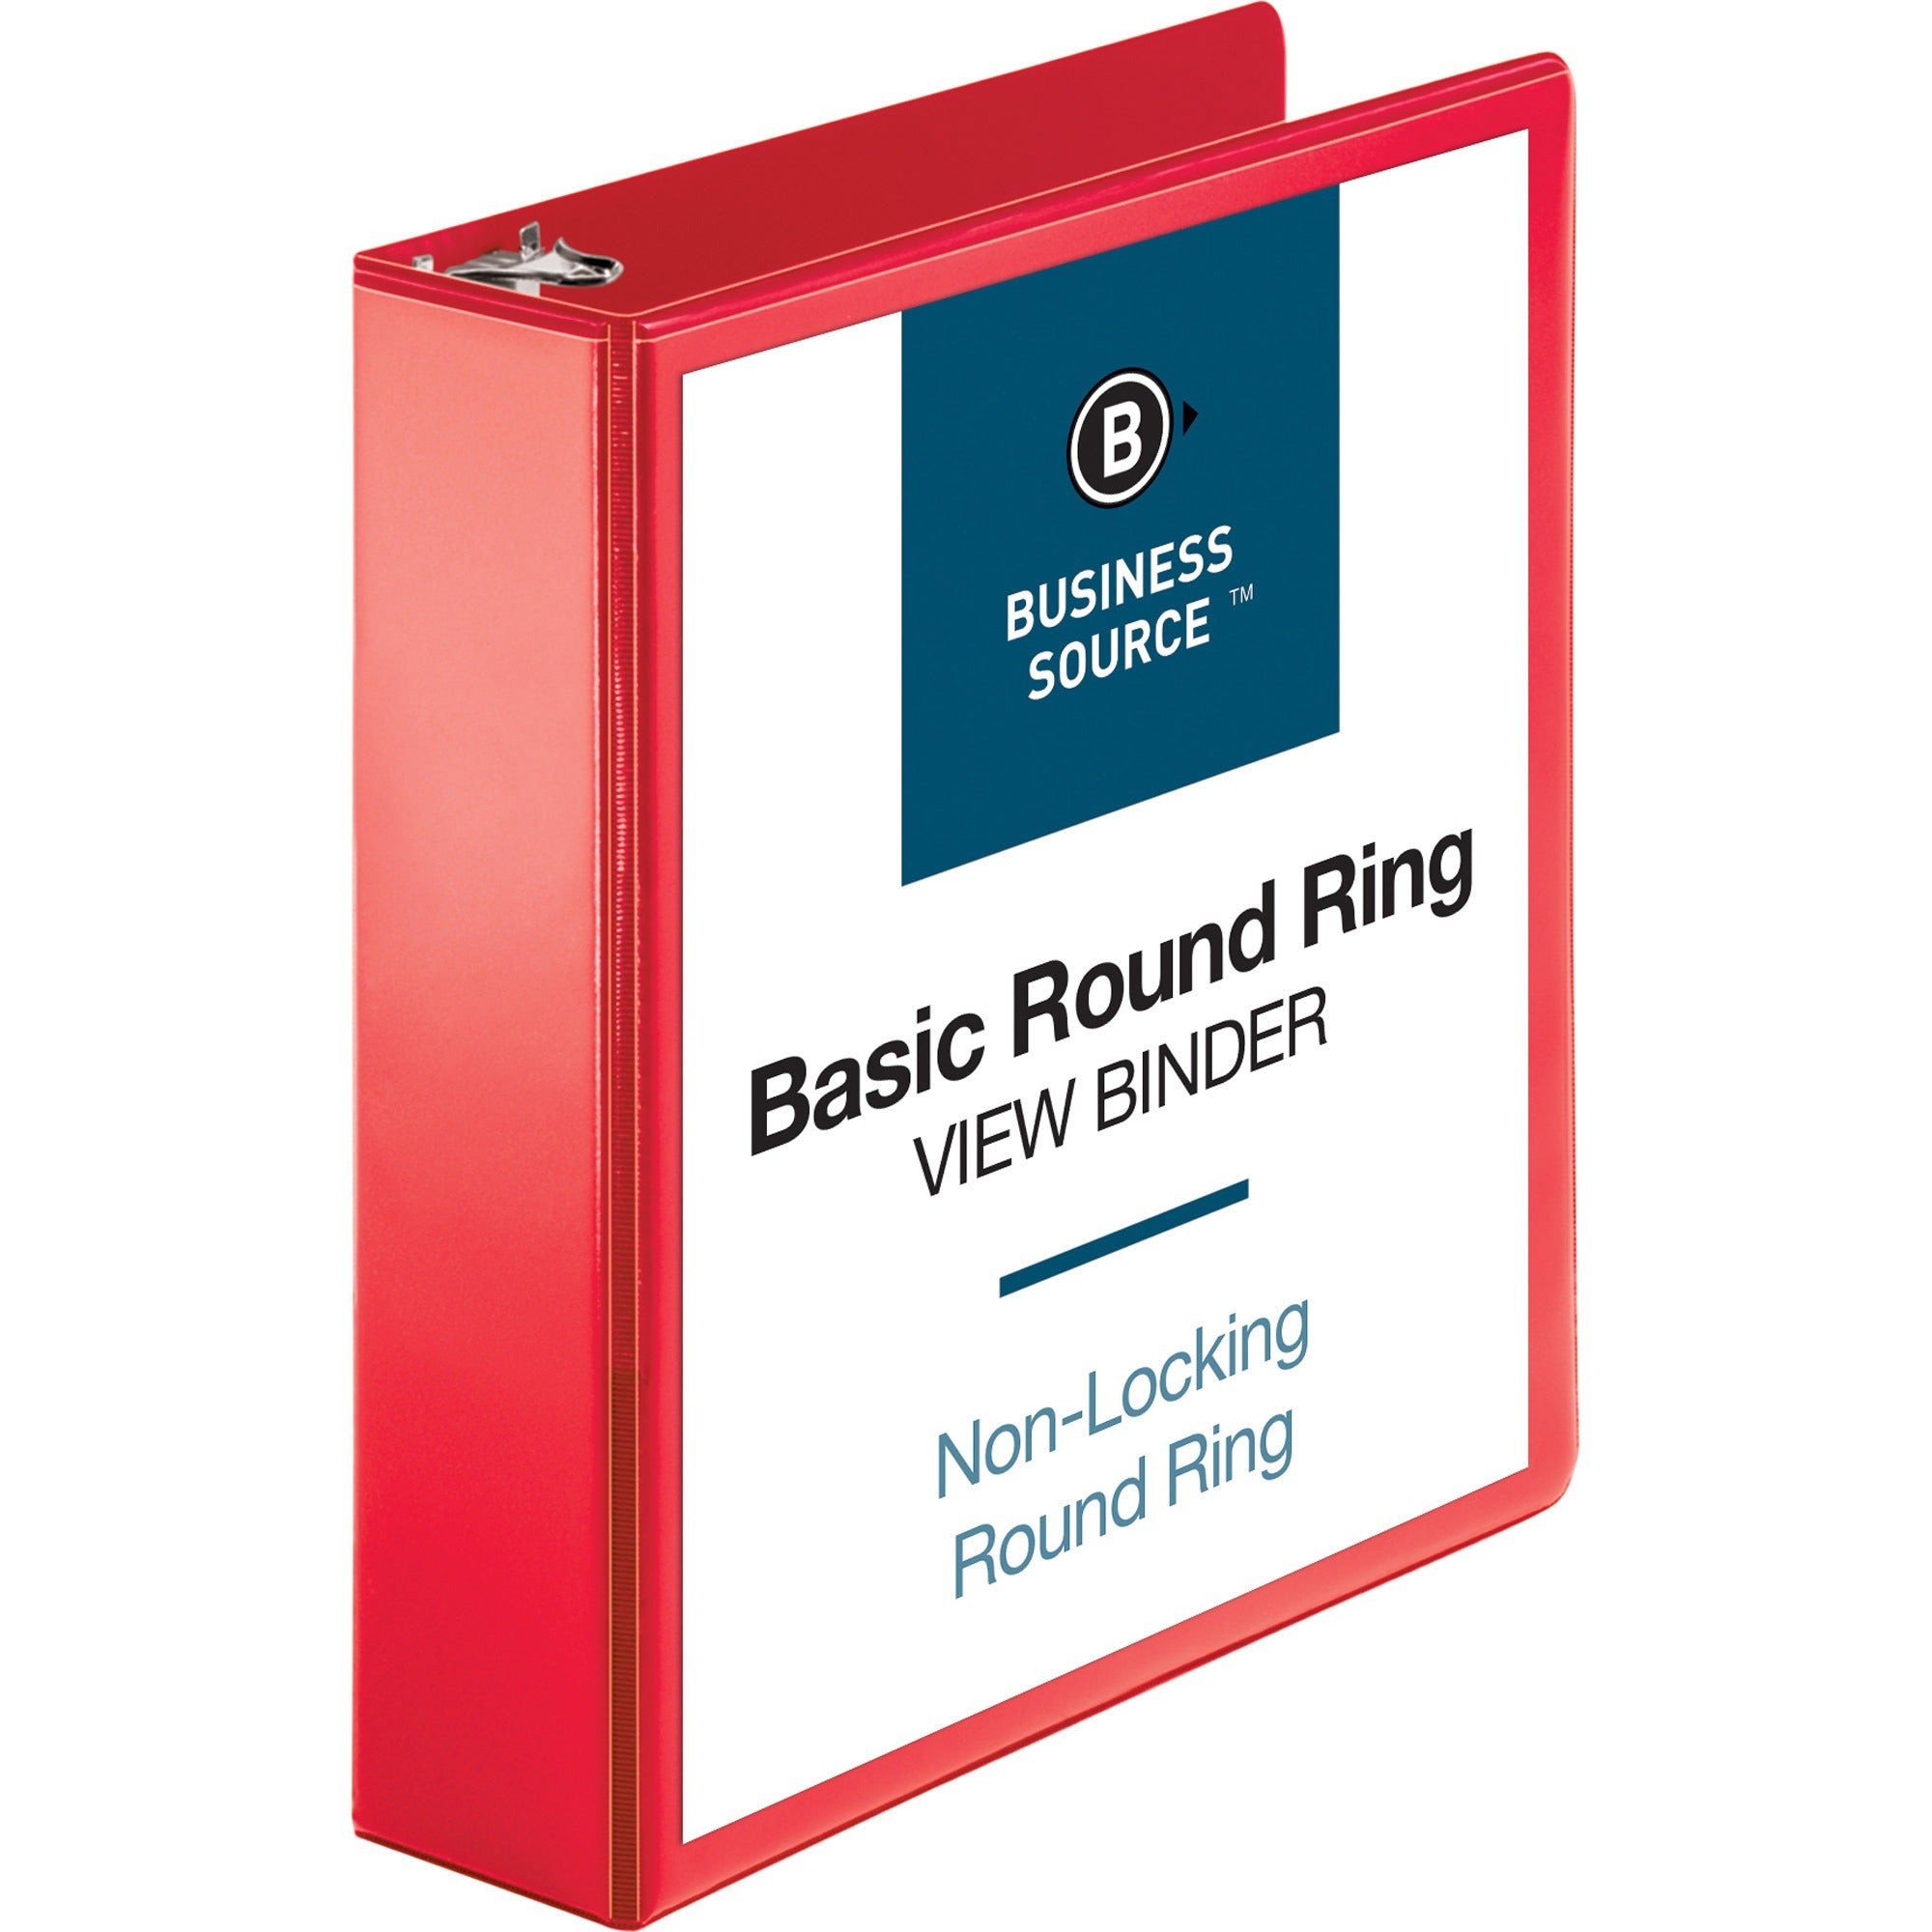 business-source-round-ring-binder-2-binder-capacity-round-ring-fasteners-2-internal-pockets-red-clear-overlay-labeling-area-1-each_bsn09968 - 1